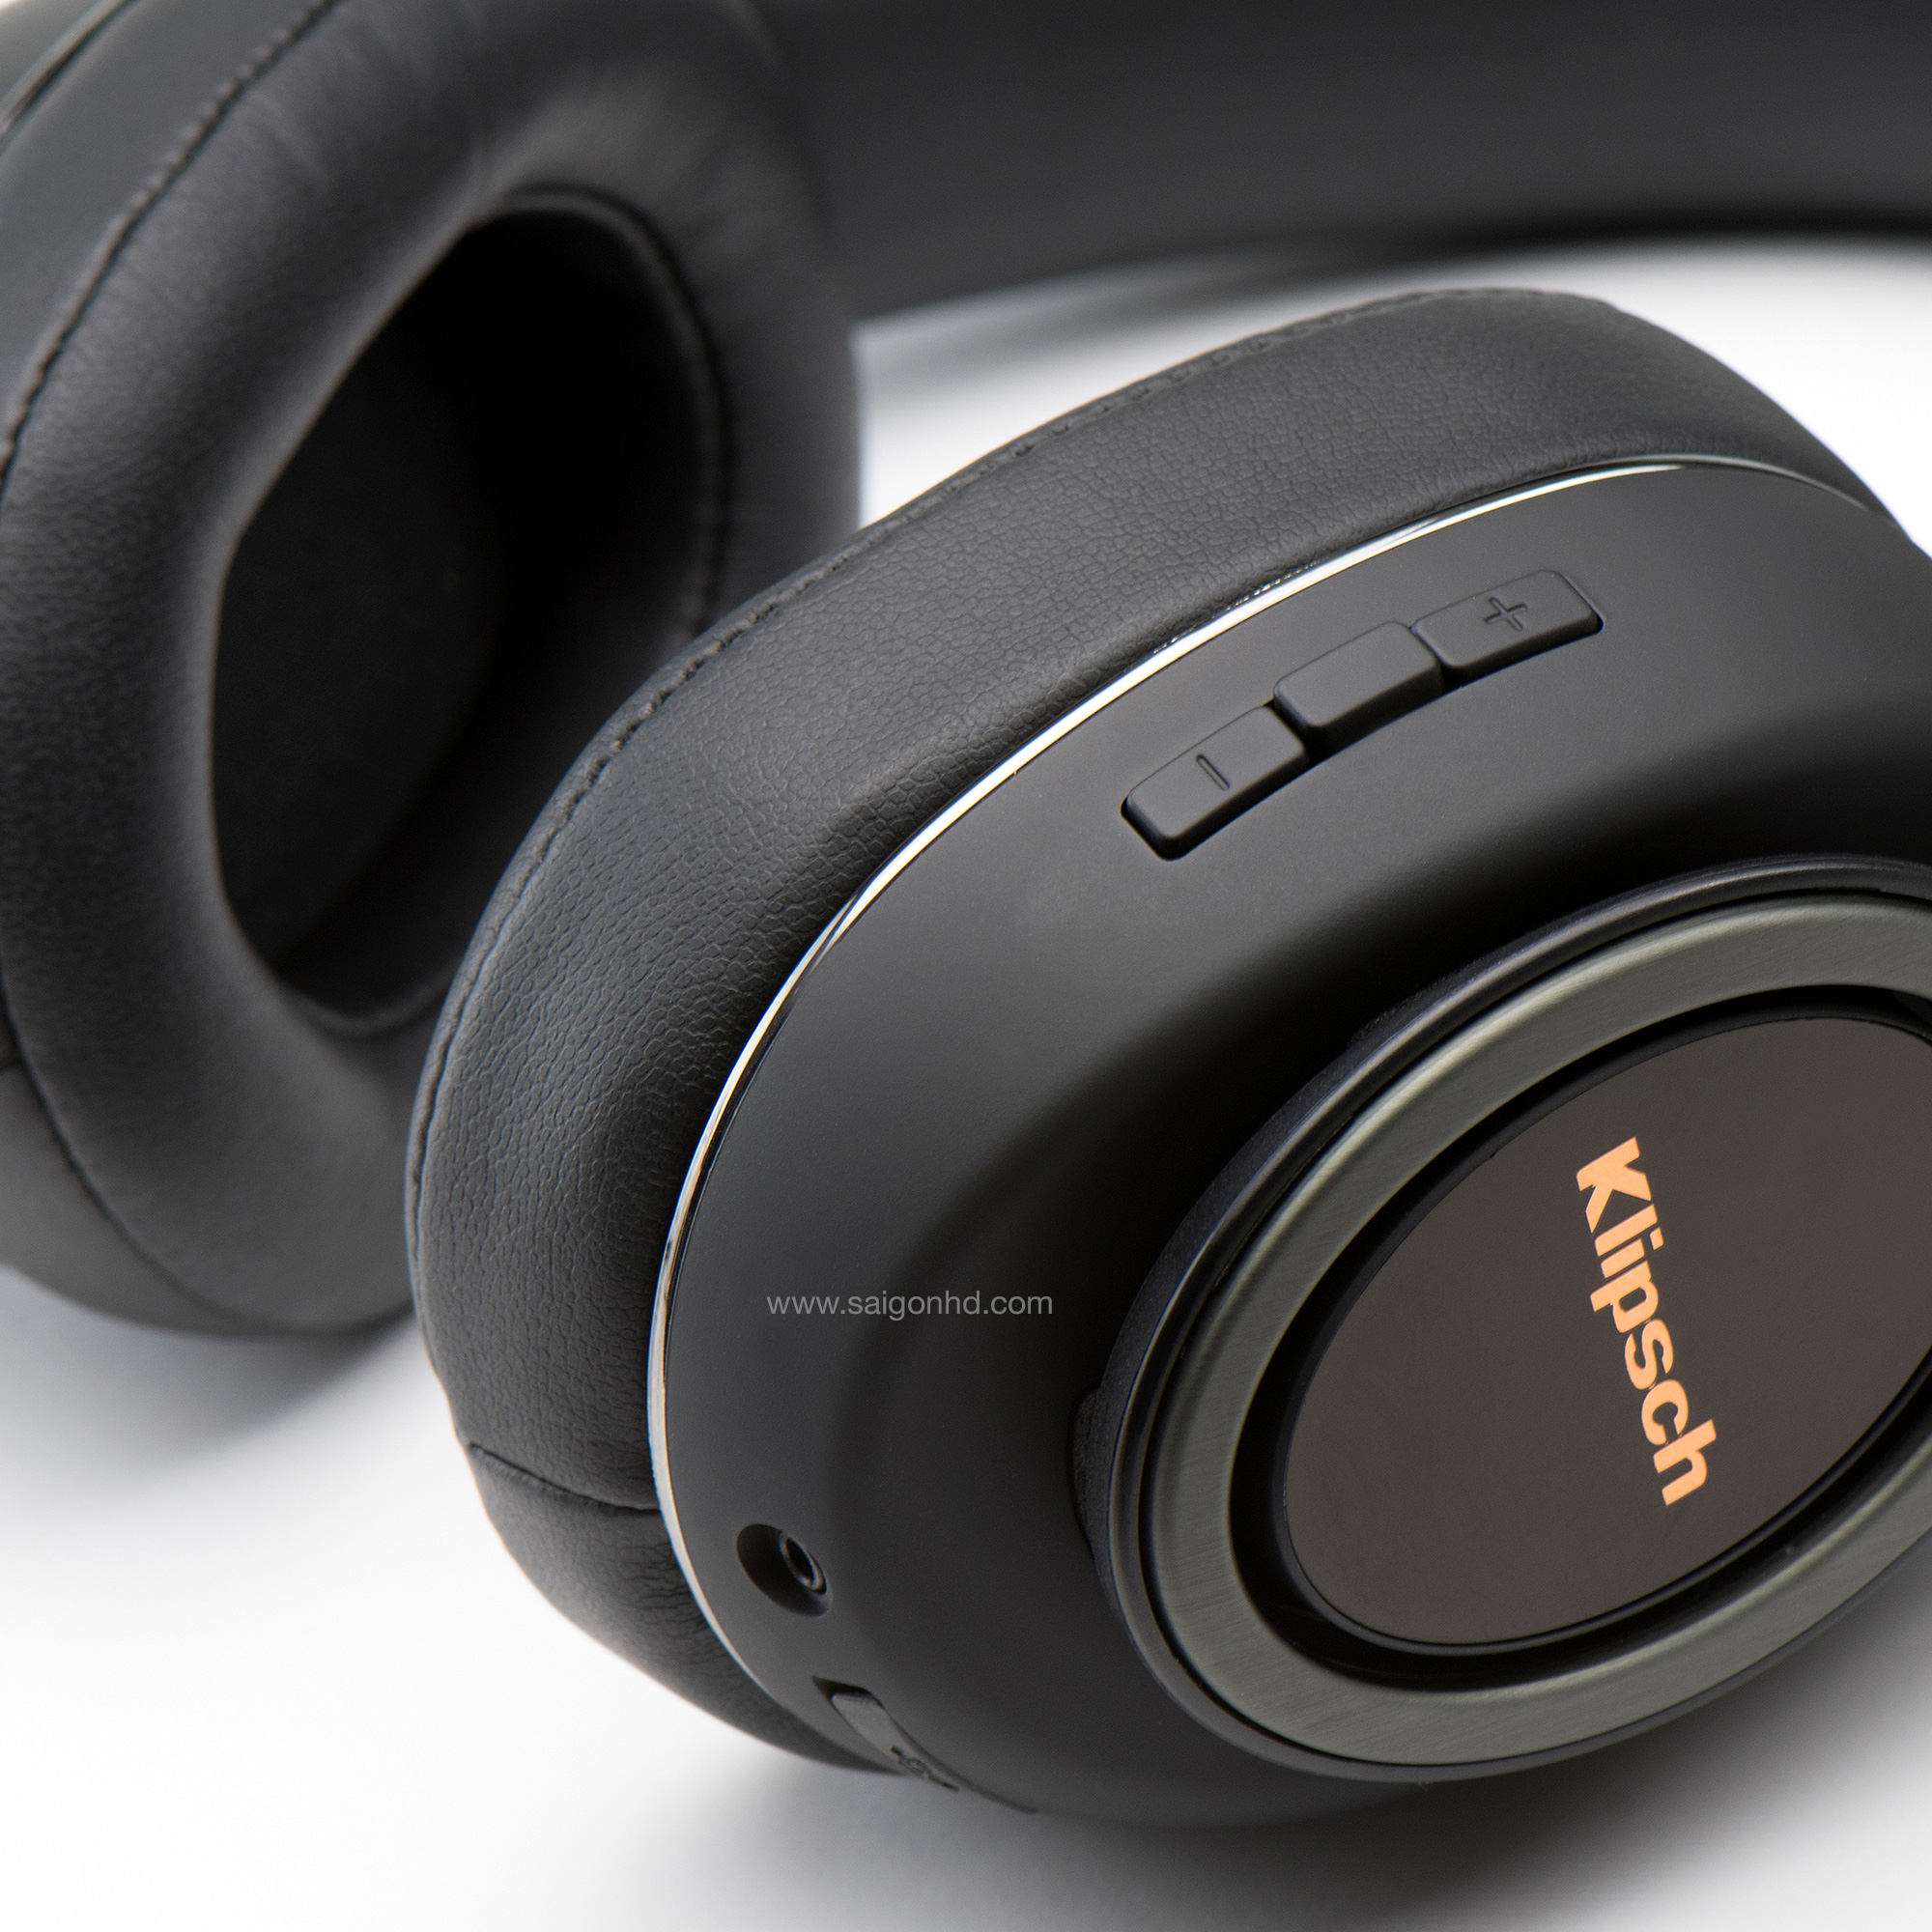 KLIPSCH REFERENCE OVER EAR BLUETOOTH